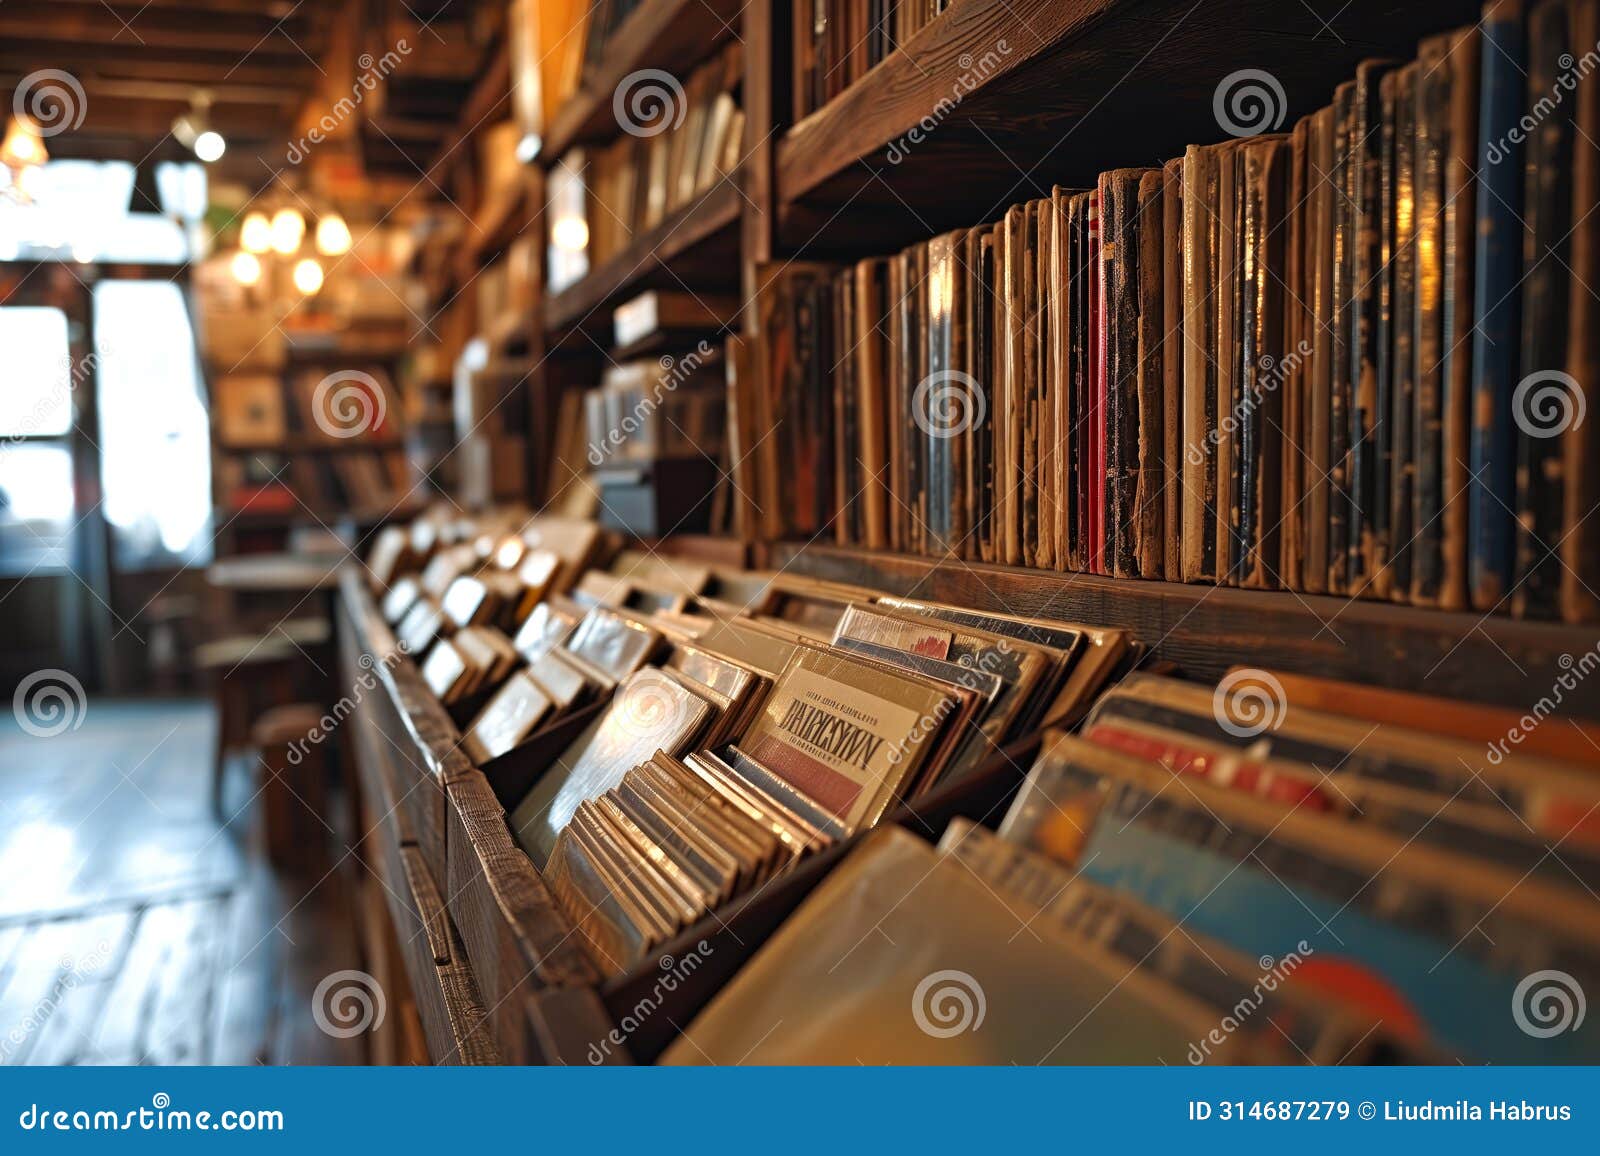 surrounded by shelves lined with vinyl records, a music aficionado flips through a collection of vintage albums.